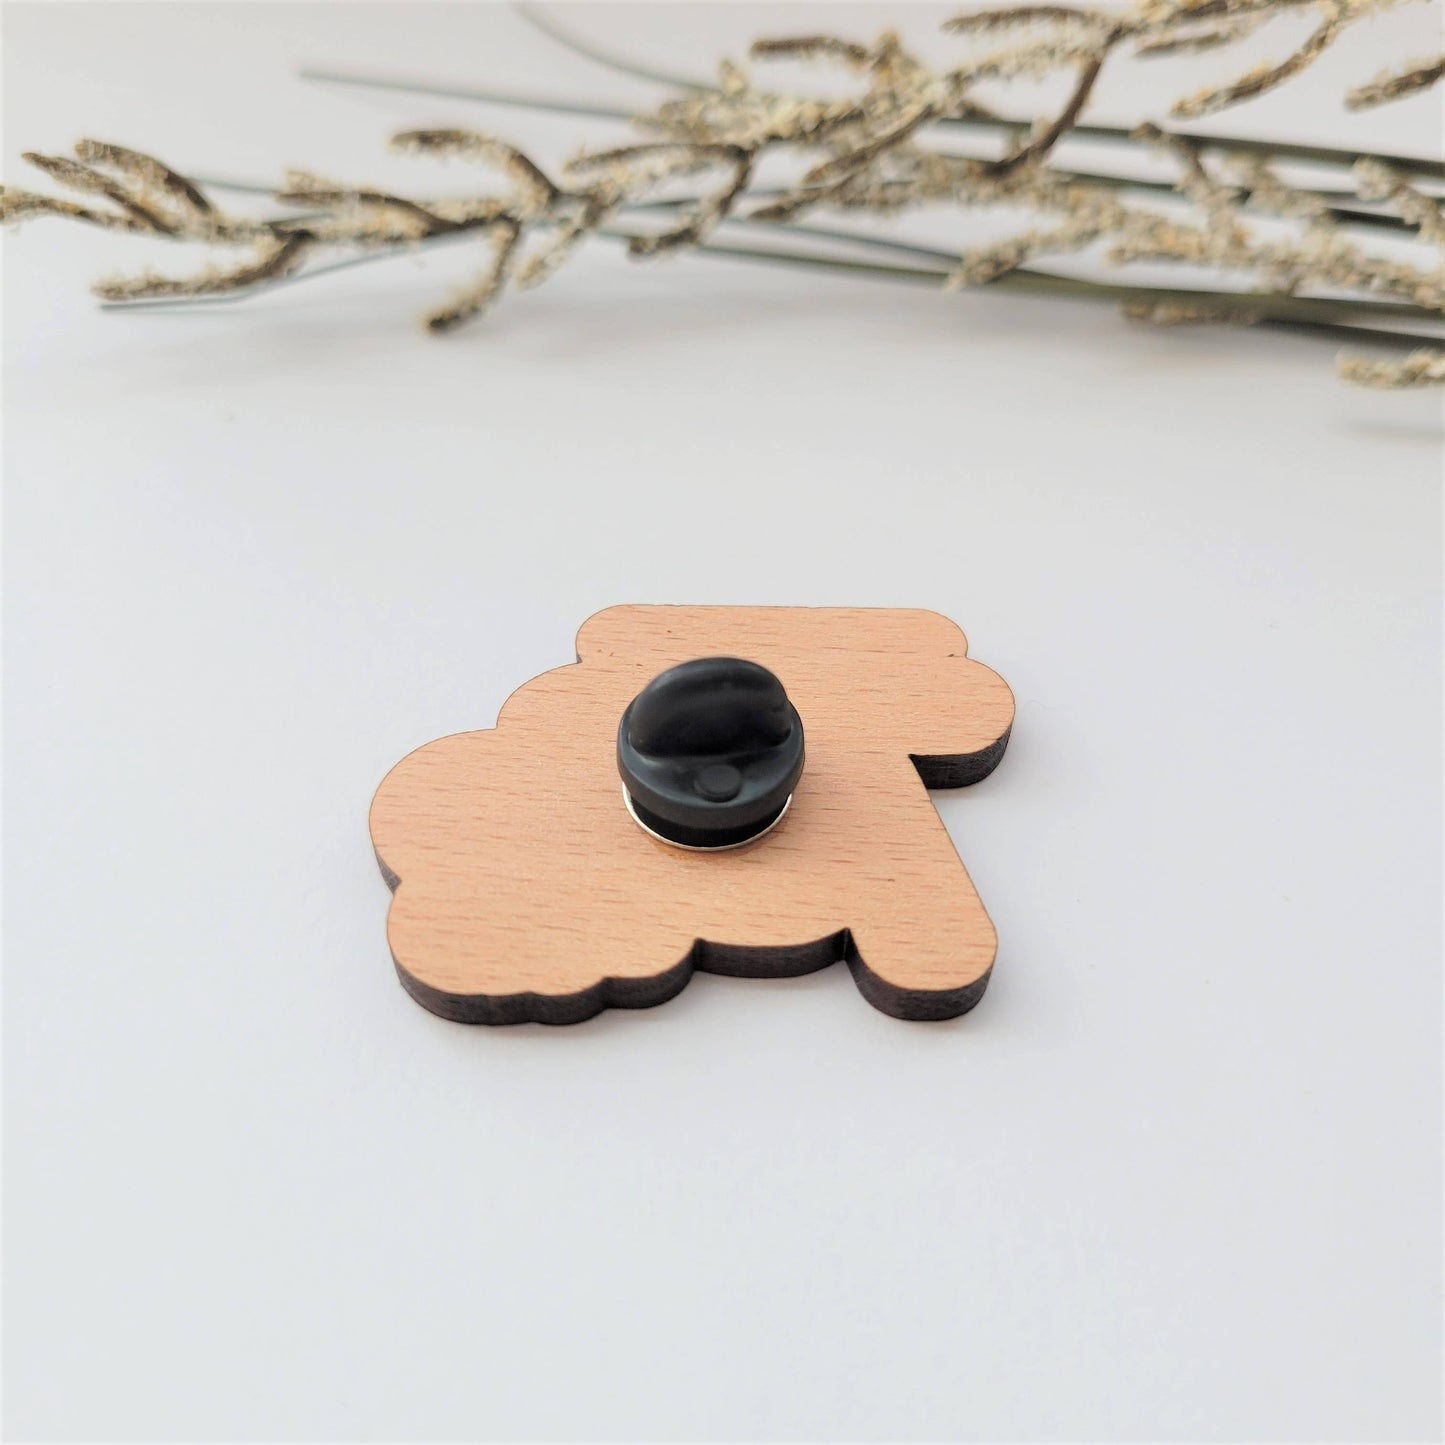 Pronoun Pins - Stacked: They/Them